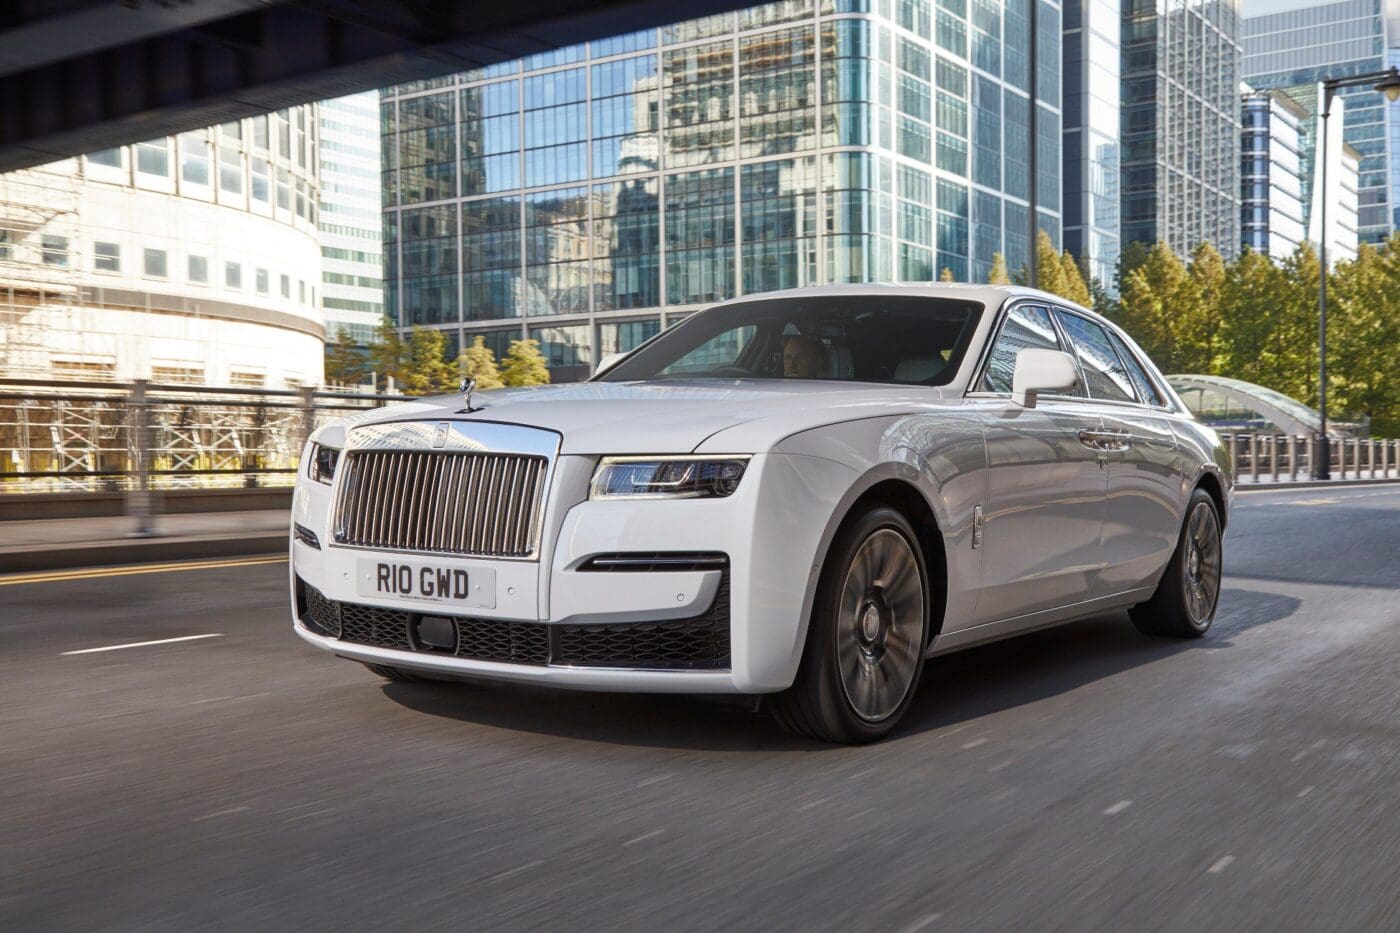 2021 Rolls-Royce Ghost Review: A Toned-Down $332,500 Sedan - Bloomberg